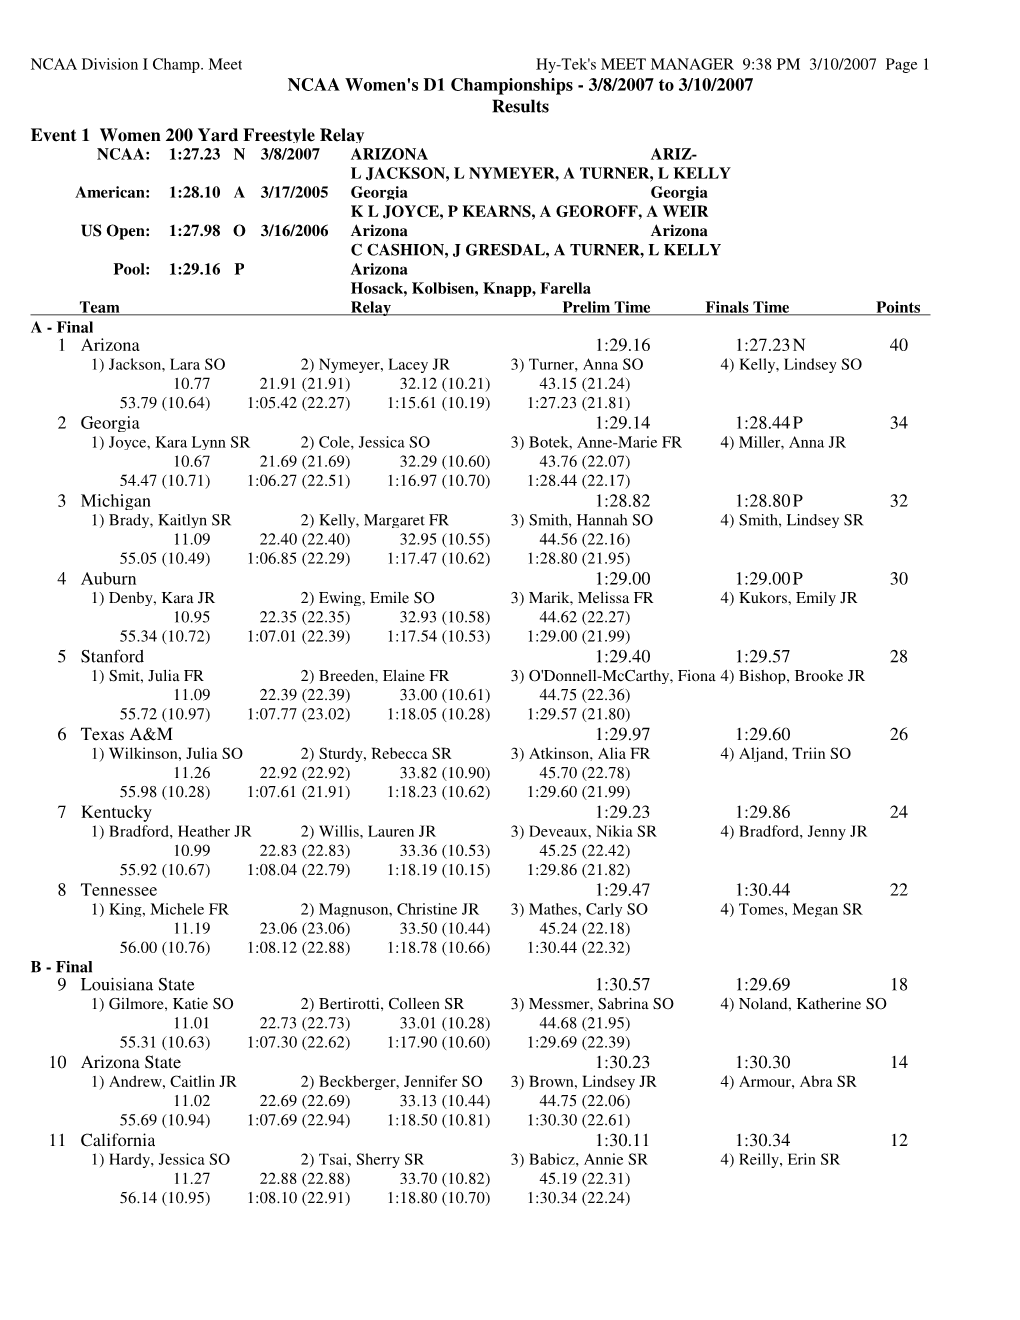 2007 Page 1 NCAA Women's D1 Championships - 3/8/2007 to 3/10/2007 Results